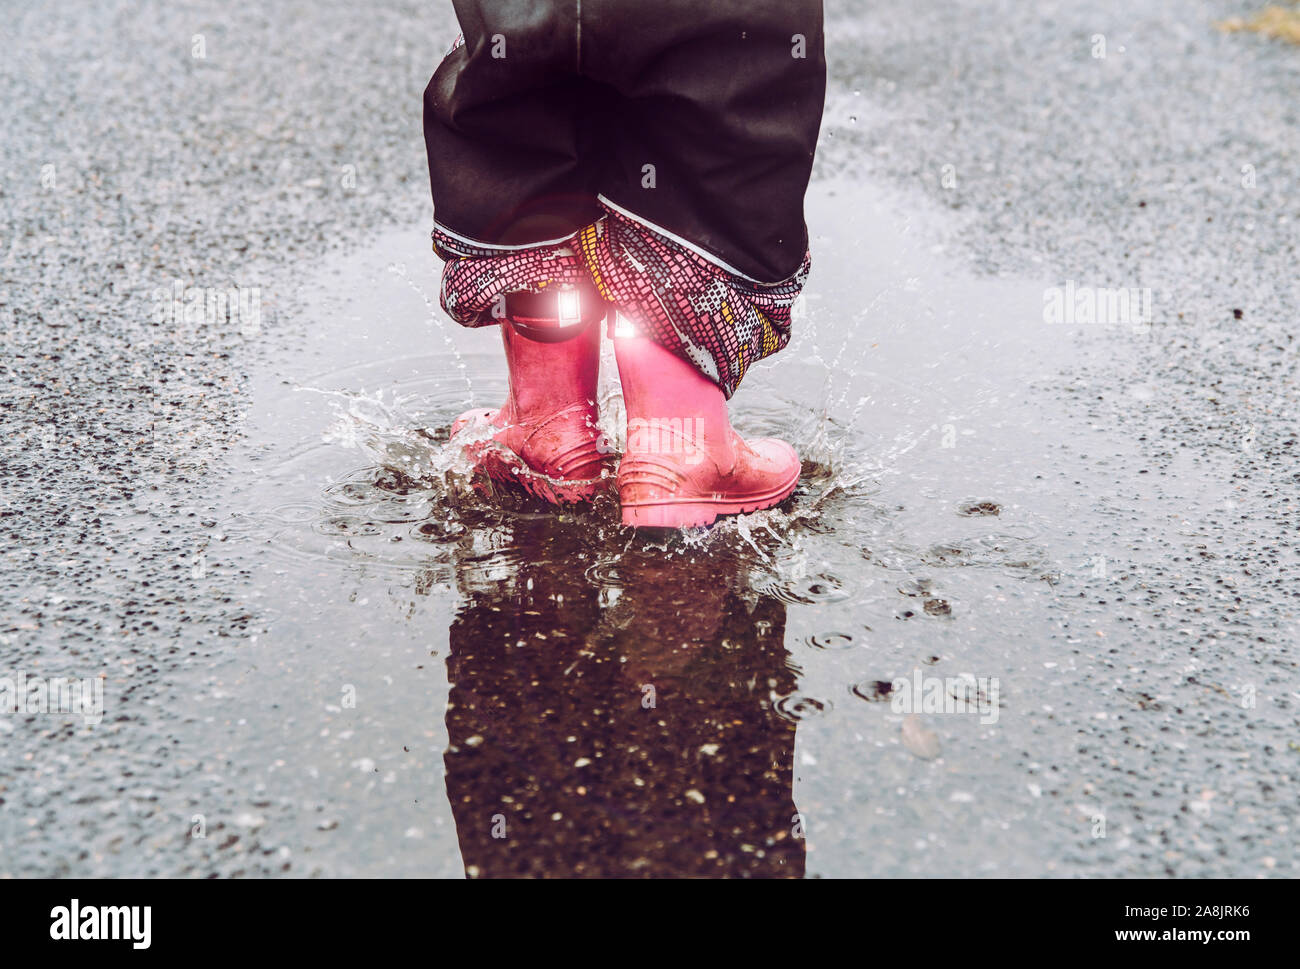 Girl having fun, jumping in water puddle on wet street, wearing rain boots with reflective detail fabric stripes shining. High visibility and safety i Stock Photo